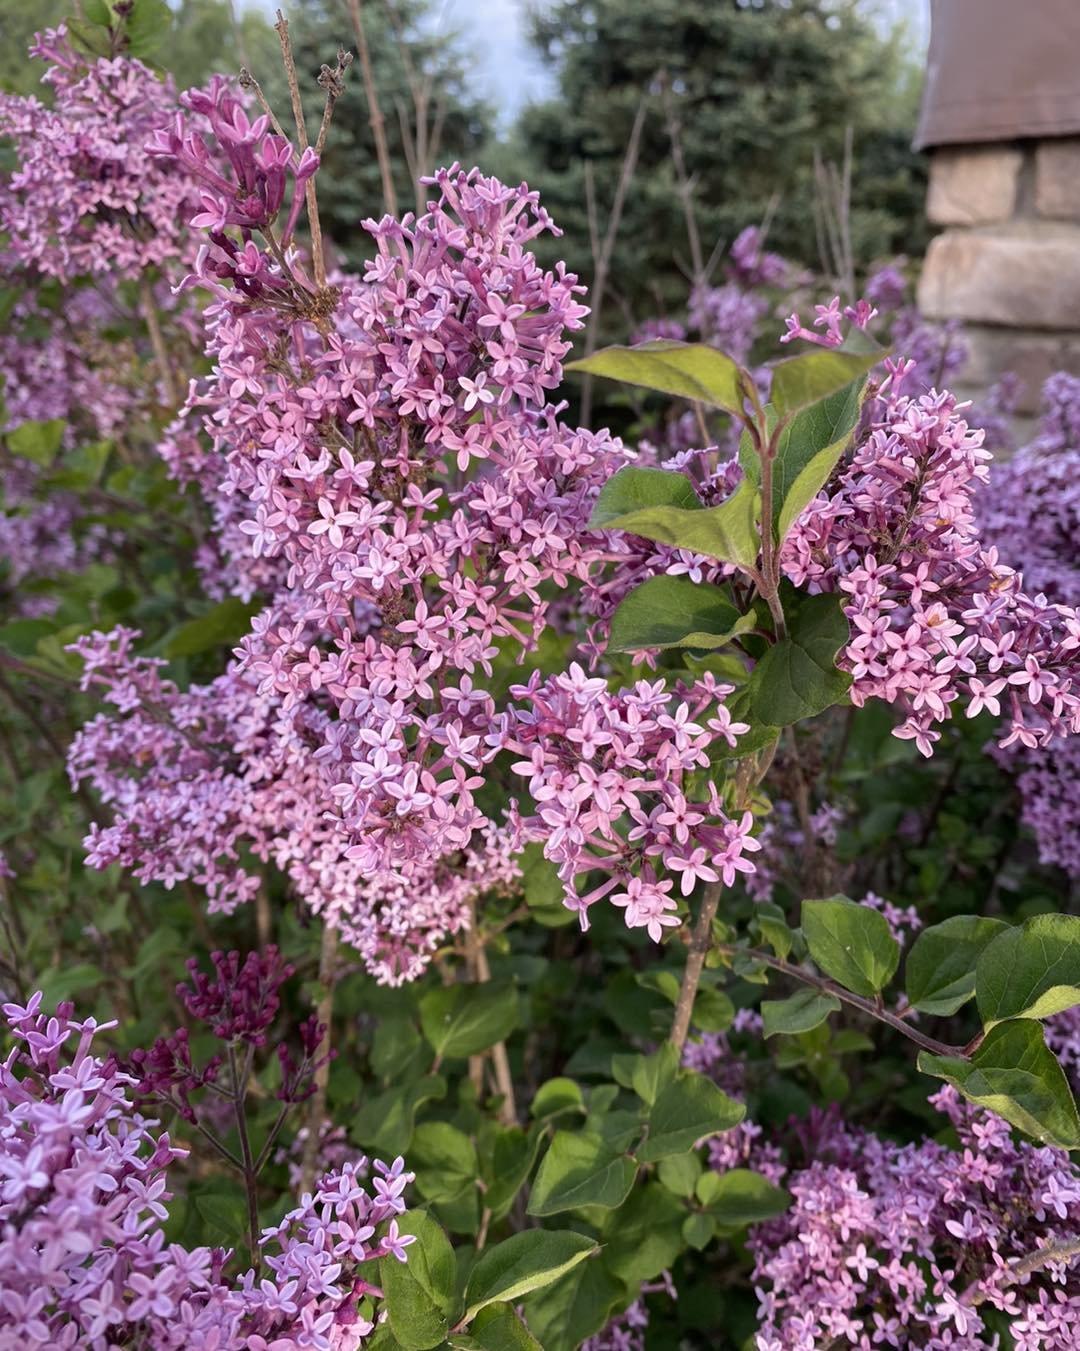 The Bloomerang lilacs are gorgeous this year- and just in time for a special, themed  birthday party this weekend!

#lilac #lilacs #bloomerang #spring #Flo #springflowers